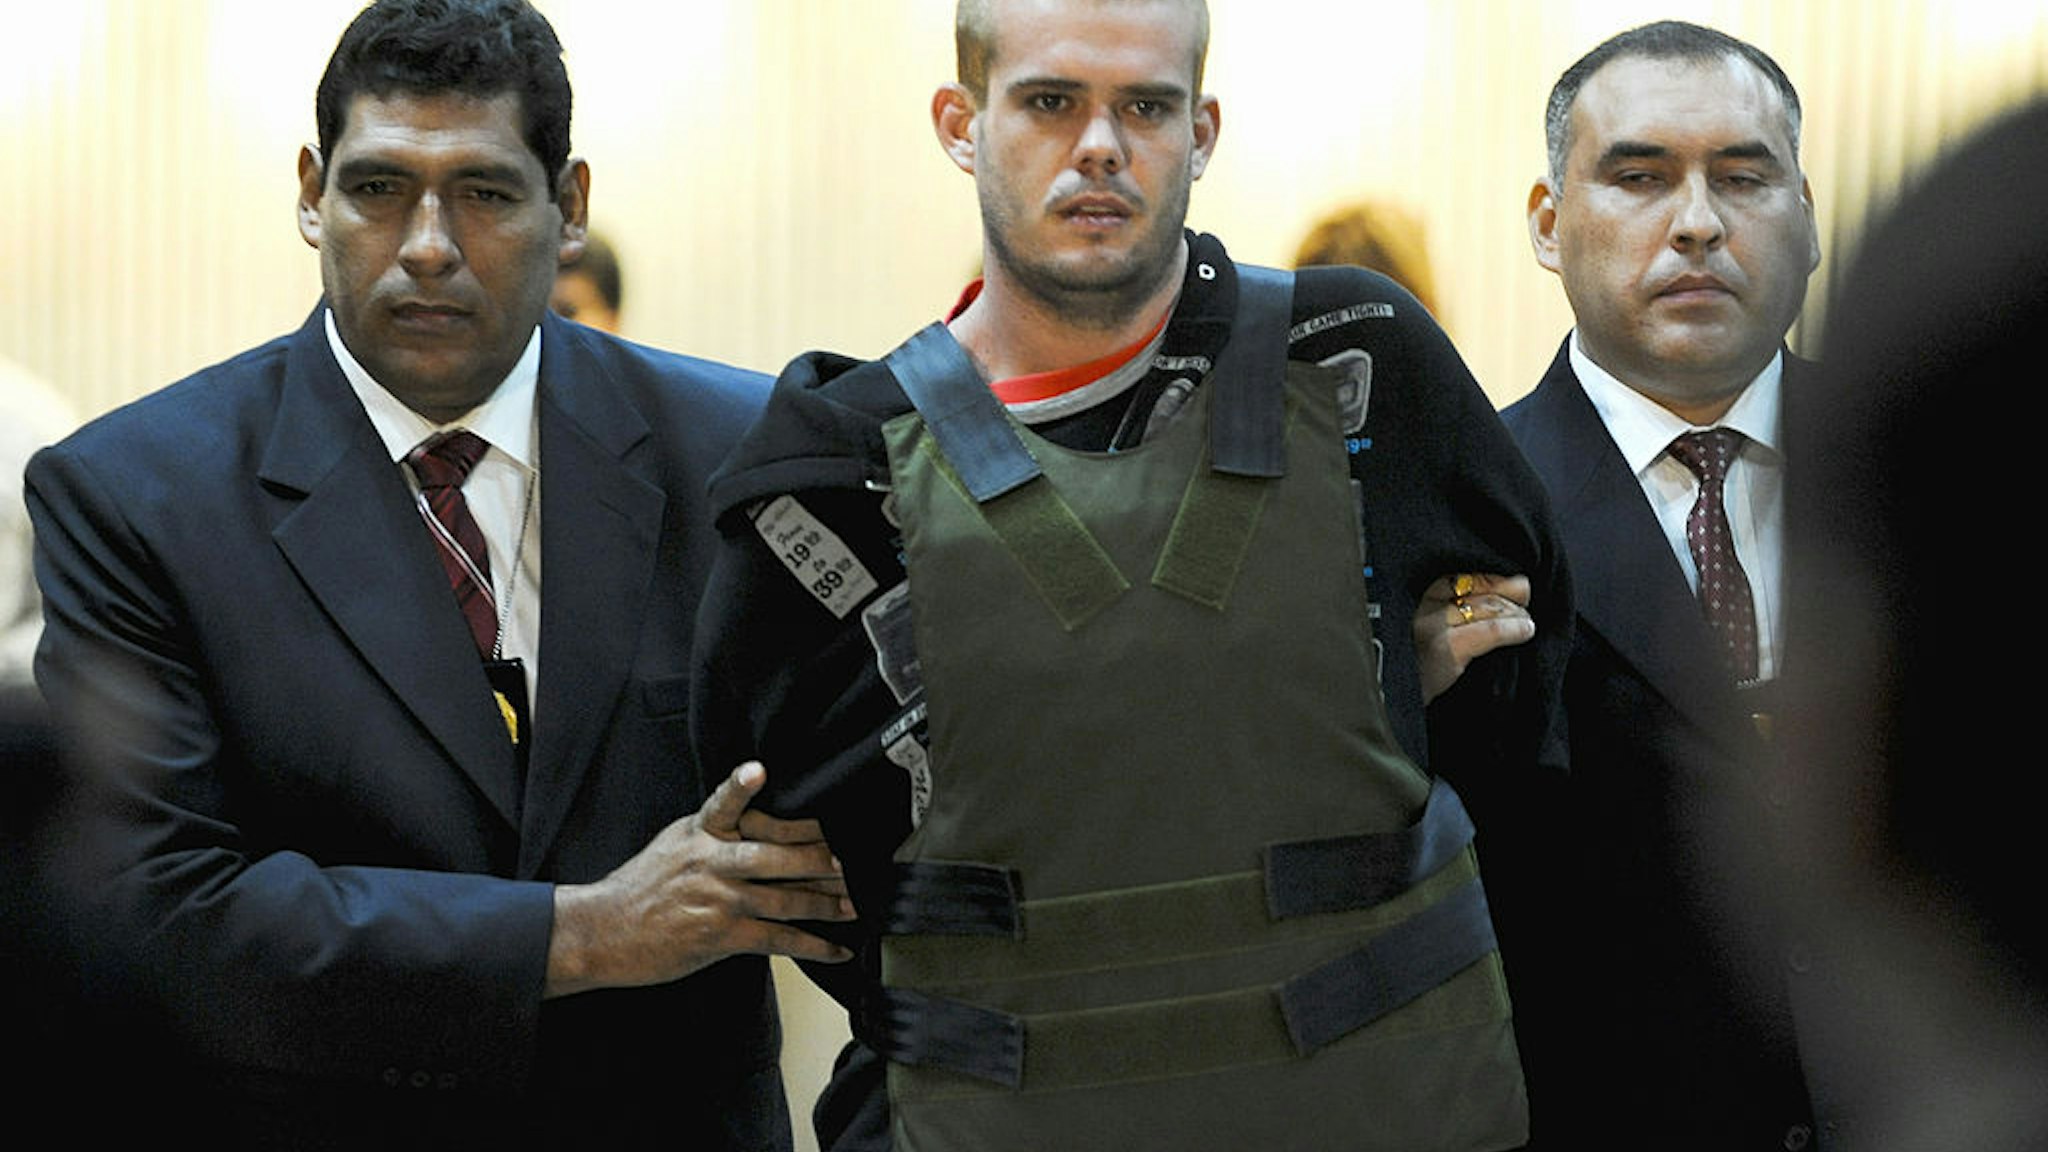 Joran Andreas Petrus van der Sloot (C), is escorted by Peruvian police as he arrive to the DIRINCRI (Criminal Investigation Direction) offices in Lima on June 5, 2010.